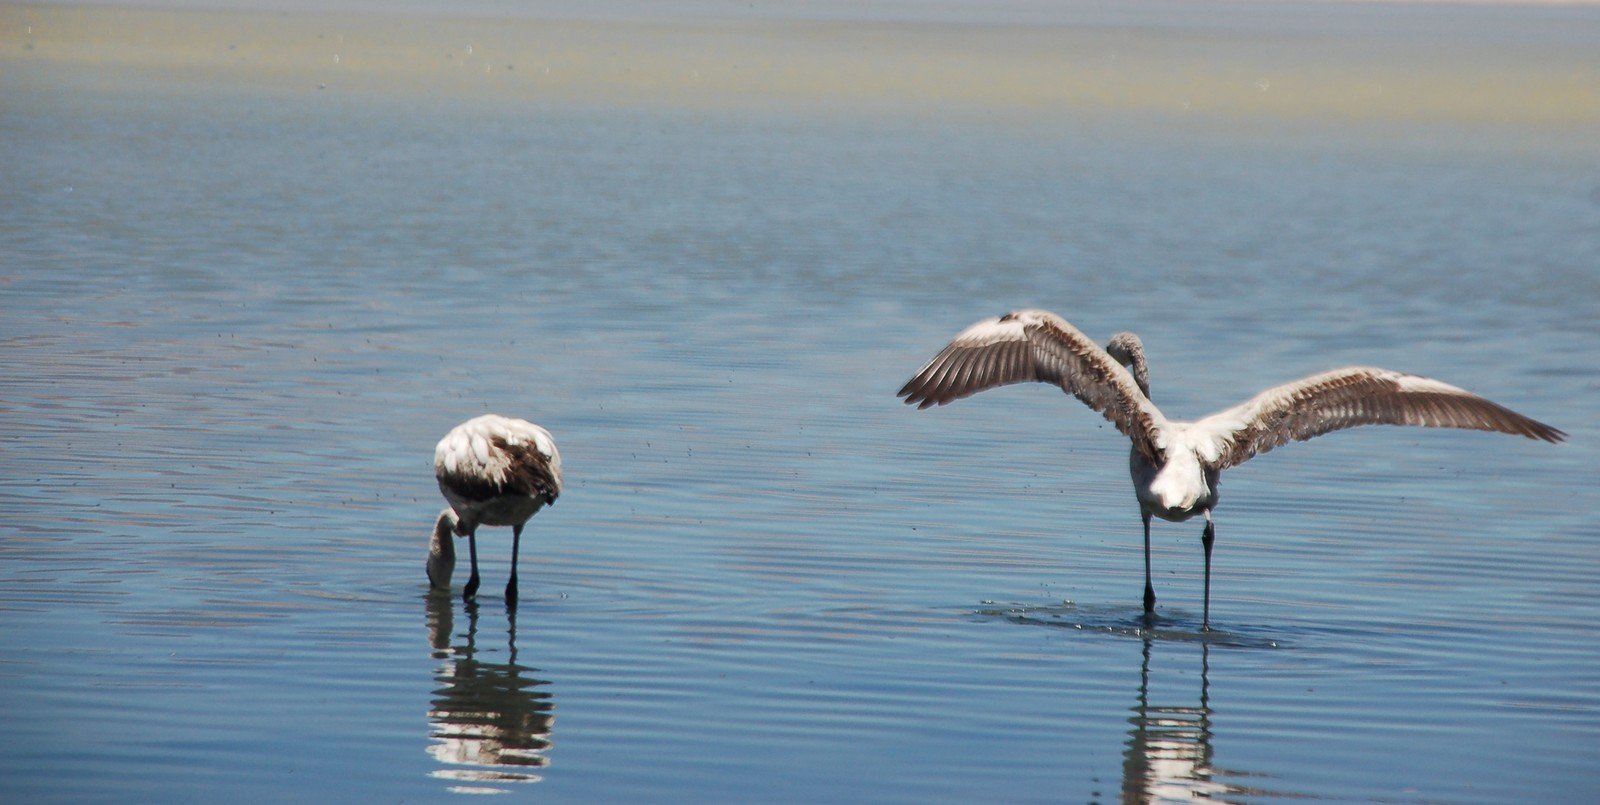 two birds with their wings open are standing in shallow water